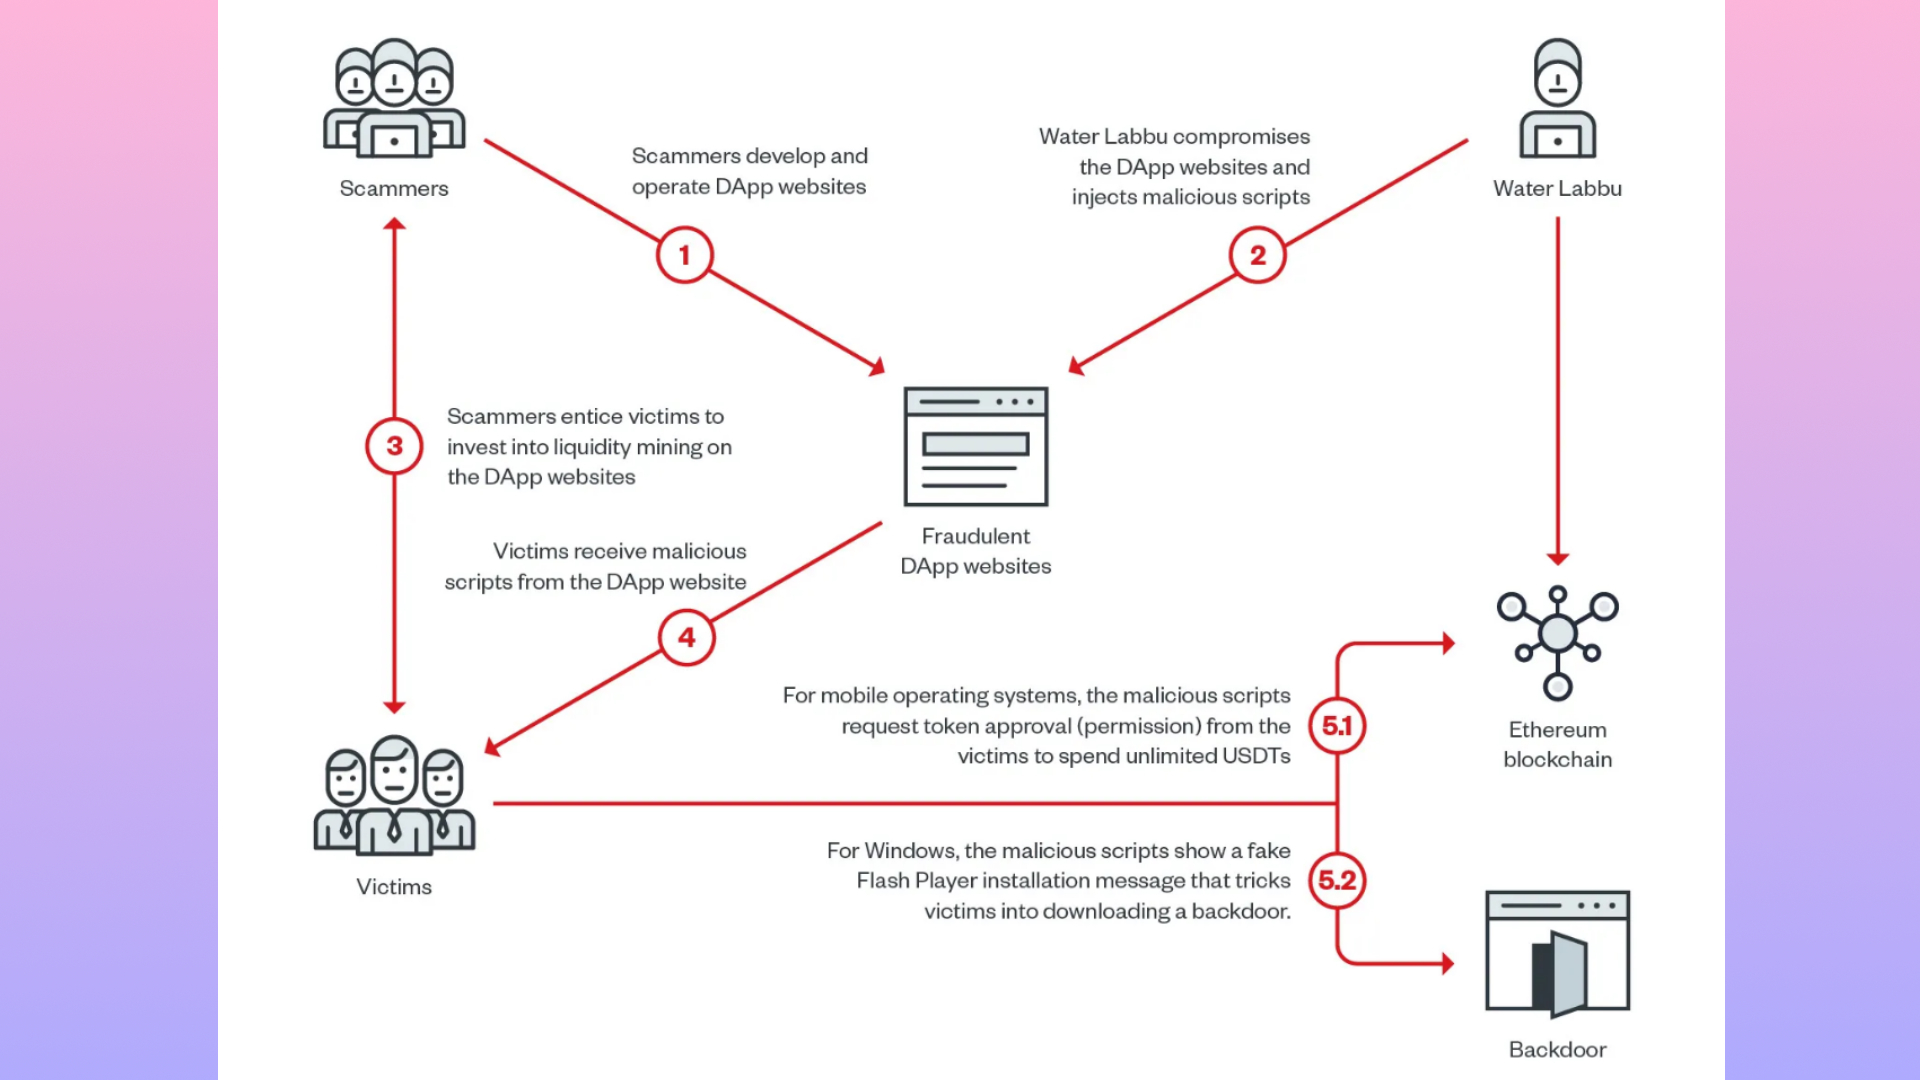 Trend Micro's explanation of the parasitic Water Labbu process.